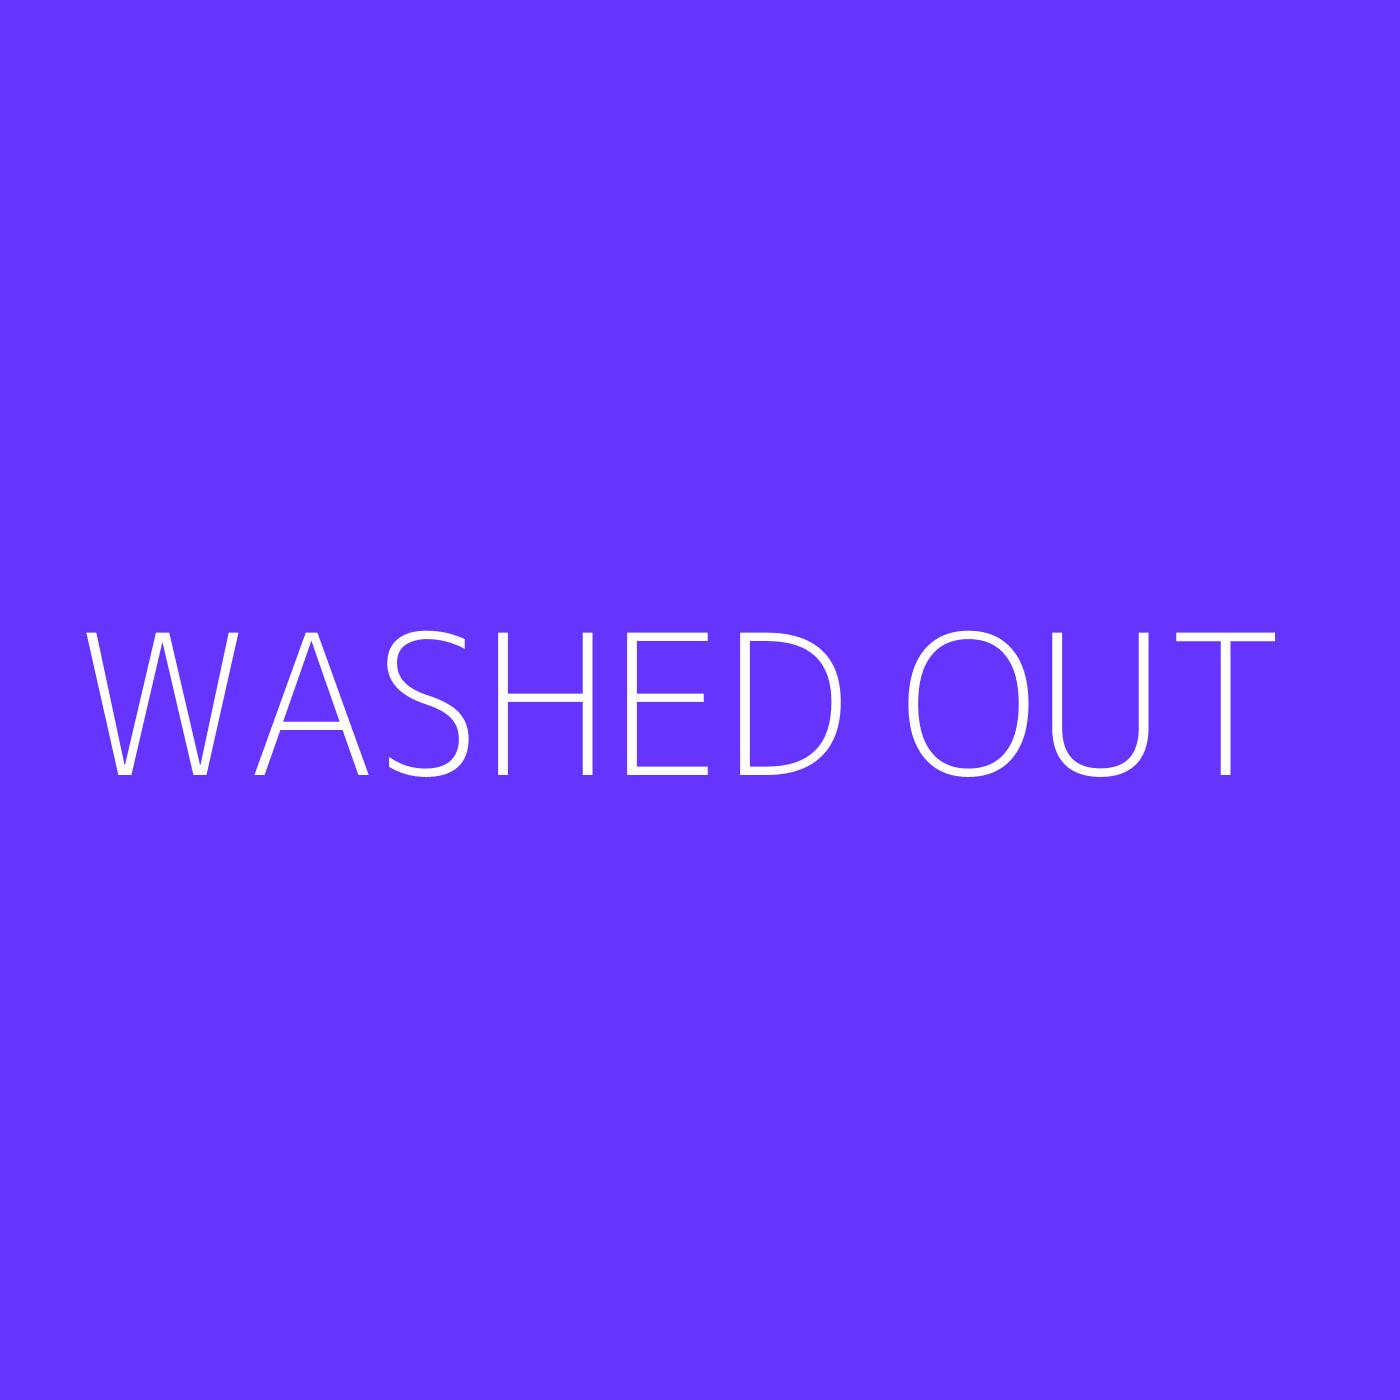 Washed Out Playlist Artwork